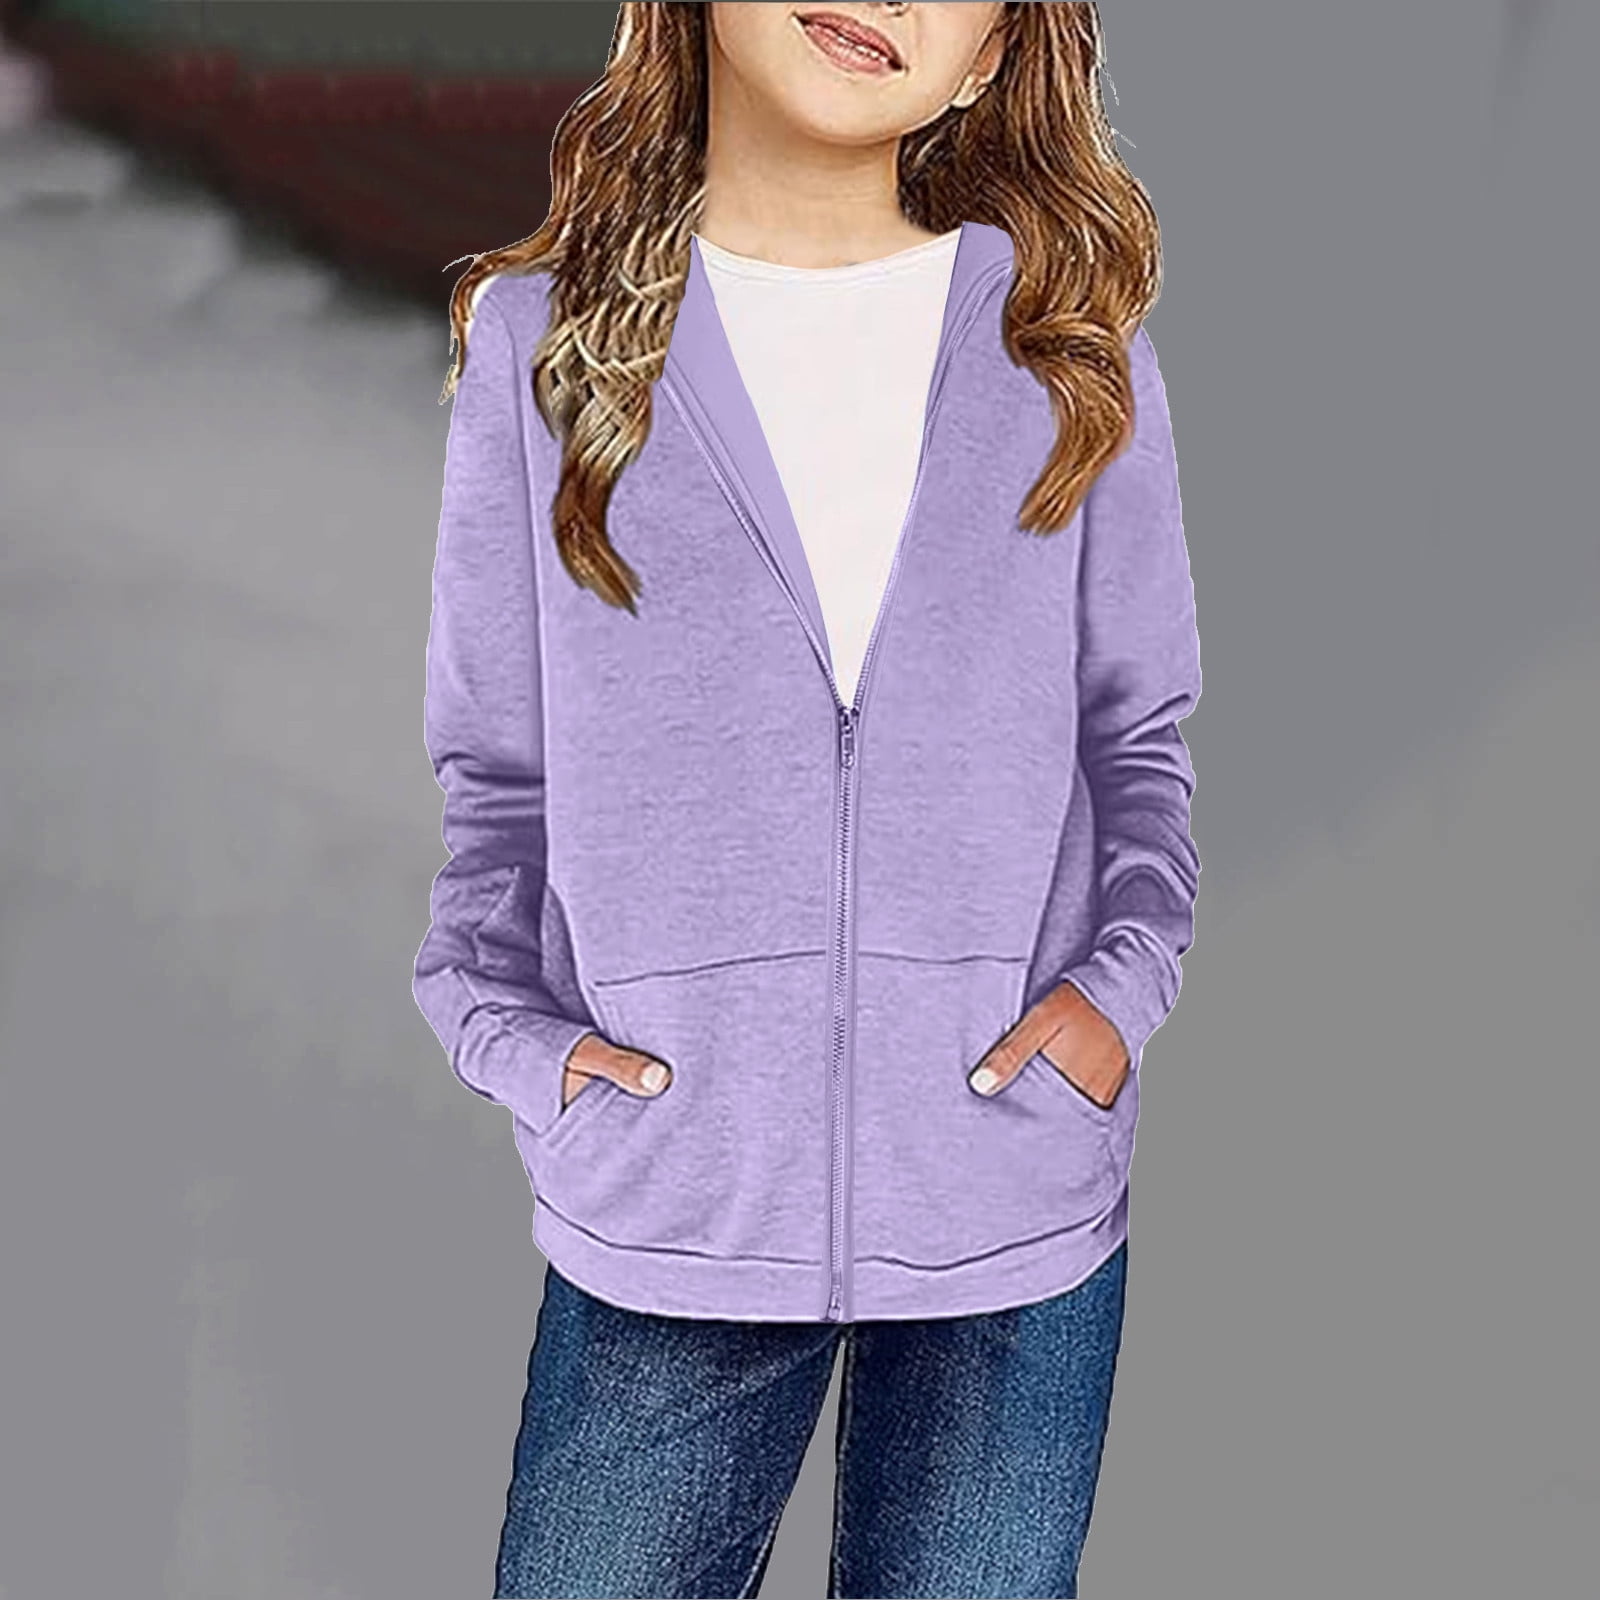 Ovbmpzd Girls Clothes Size 14-16 Toddlers Hoodie Outwear Long Sleeve  Sweatshirt Casual Pocket Pullover for Teen Girl